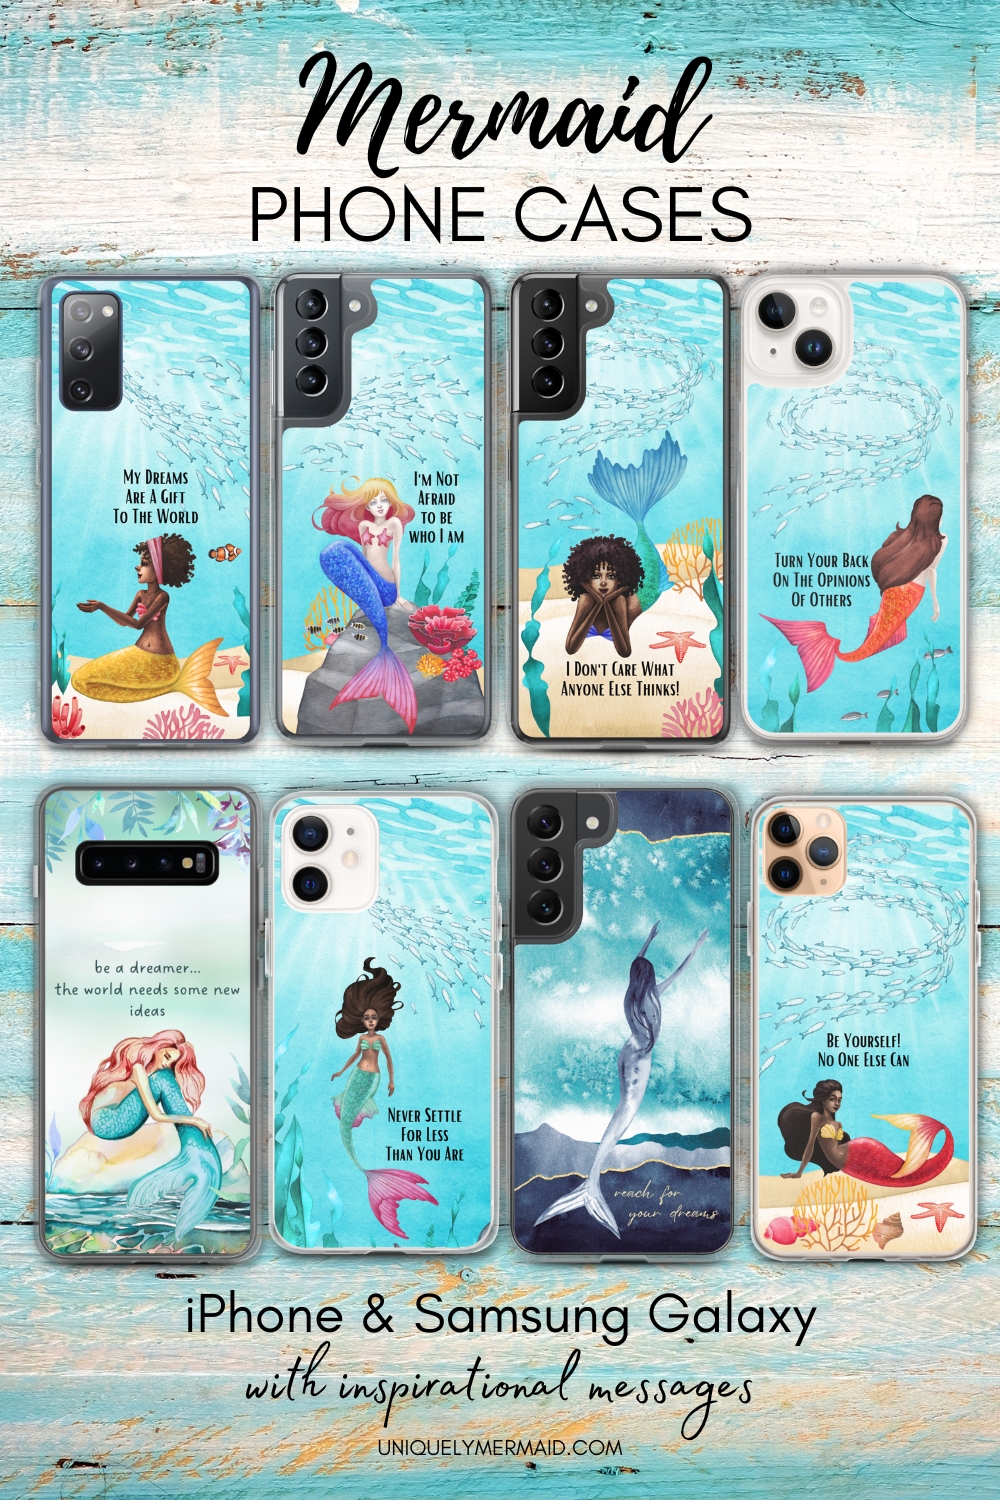 Select a gorgeous mermaid phone case to protect your iPhone or Samsung Galaxy. Each design has an inspiring message.